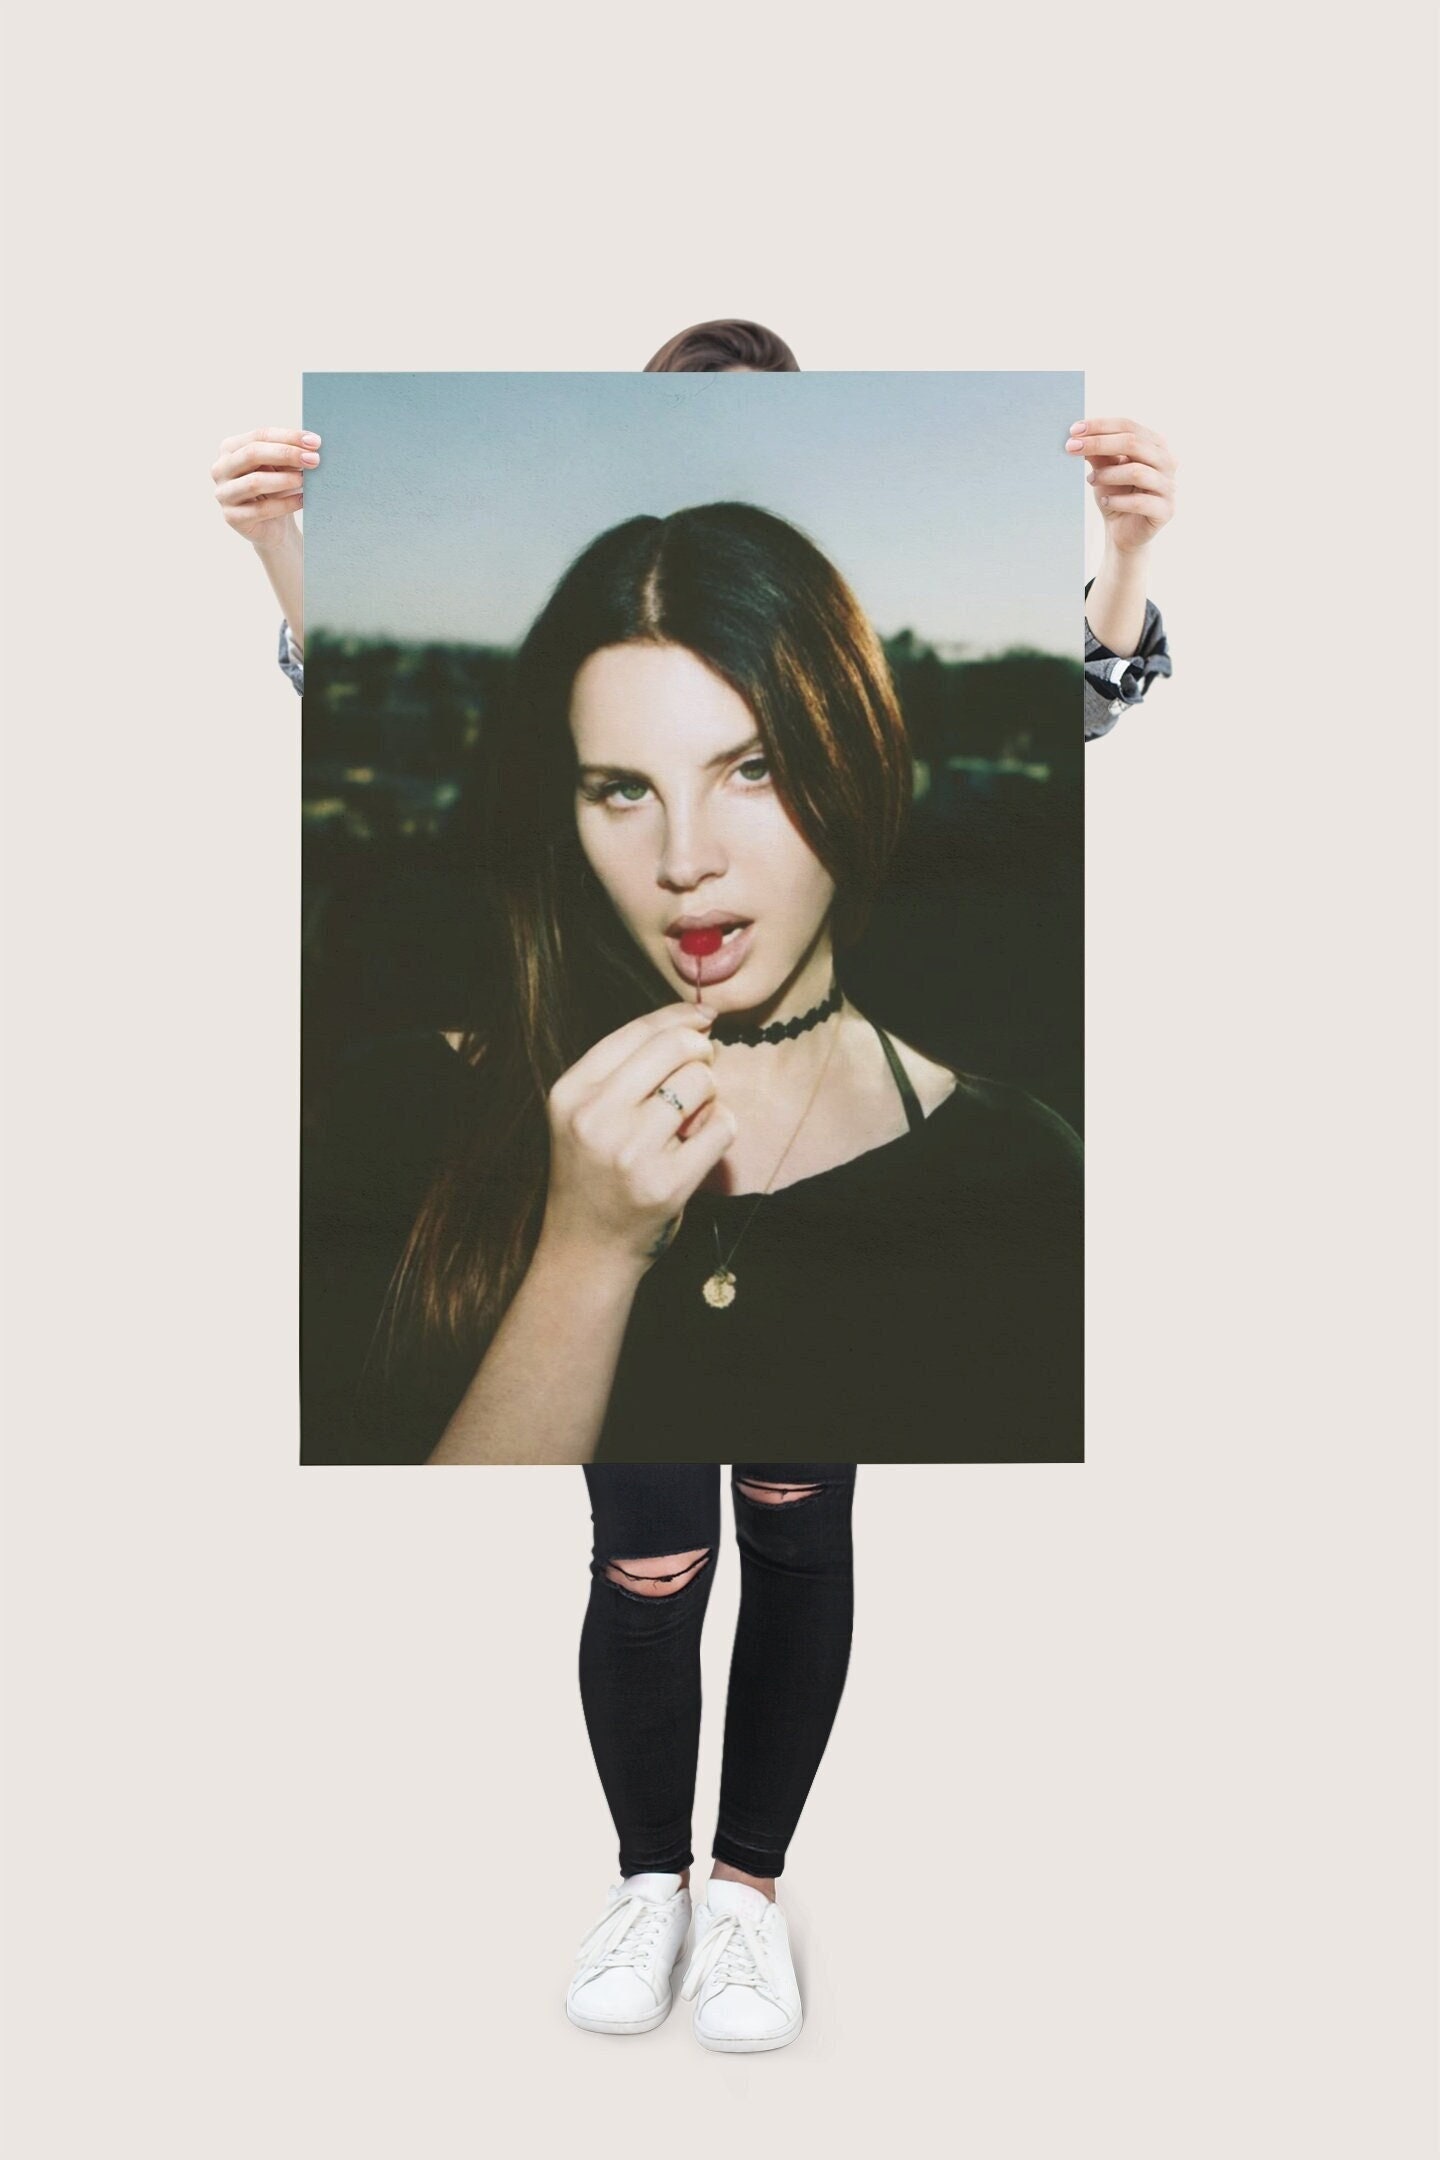 American Whore Lana Del Rey Poster sold by Daisy, SKU 238496